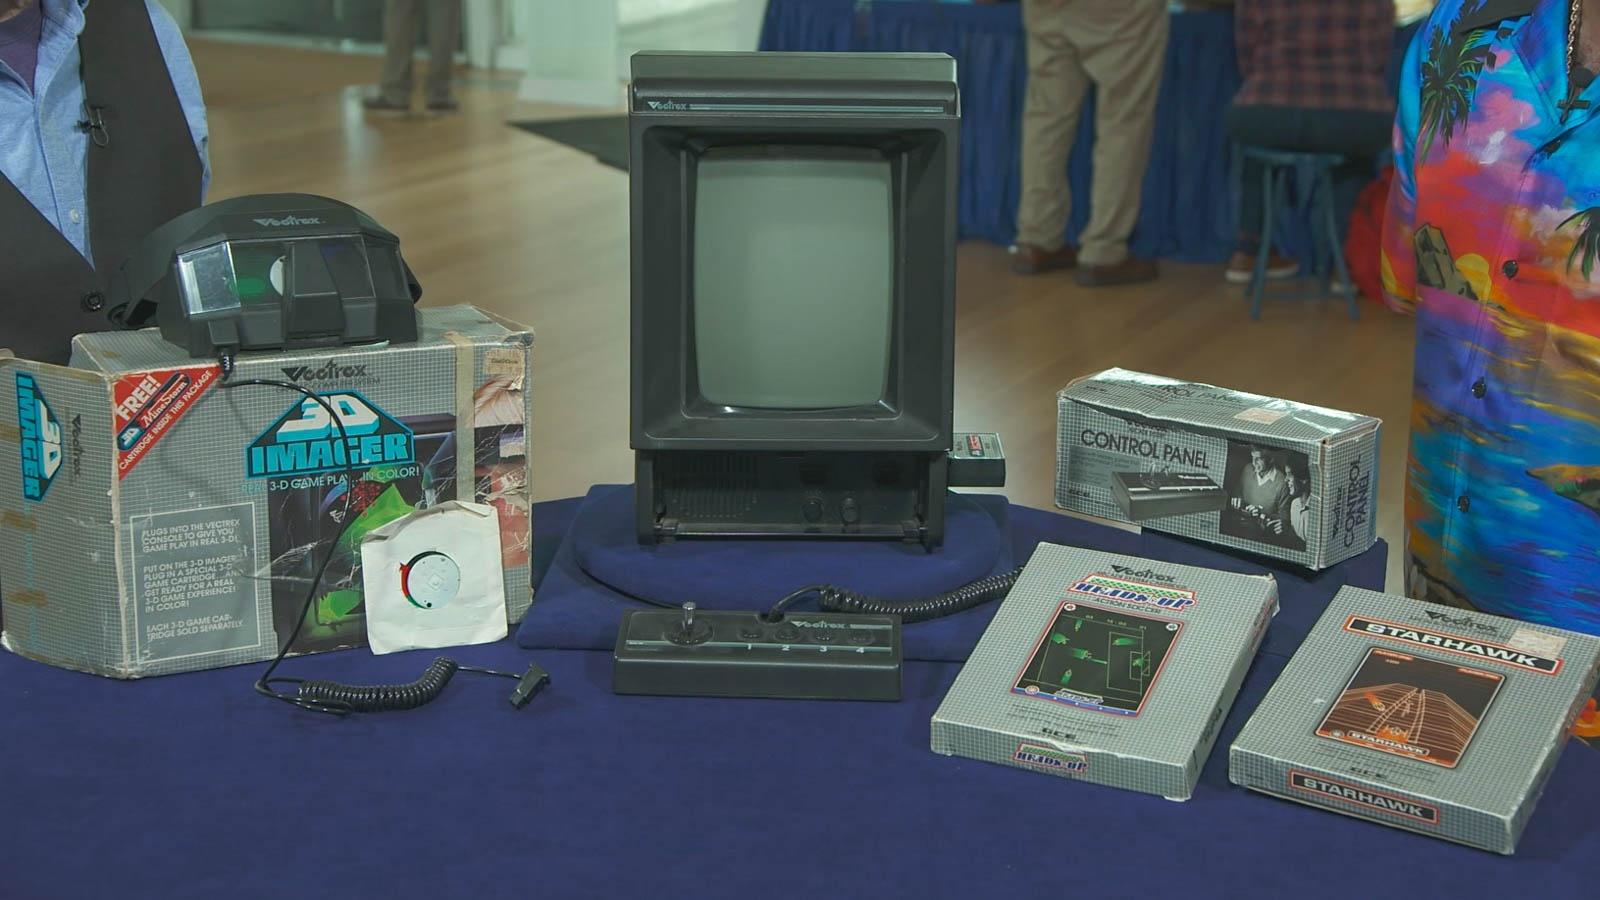 Appraisal: 1982 Vectrex Arcade System with 3D Imager & Games